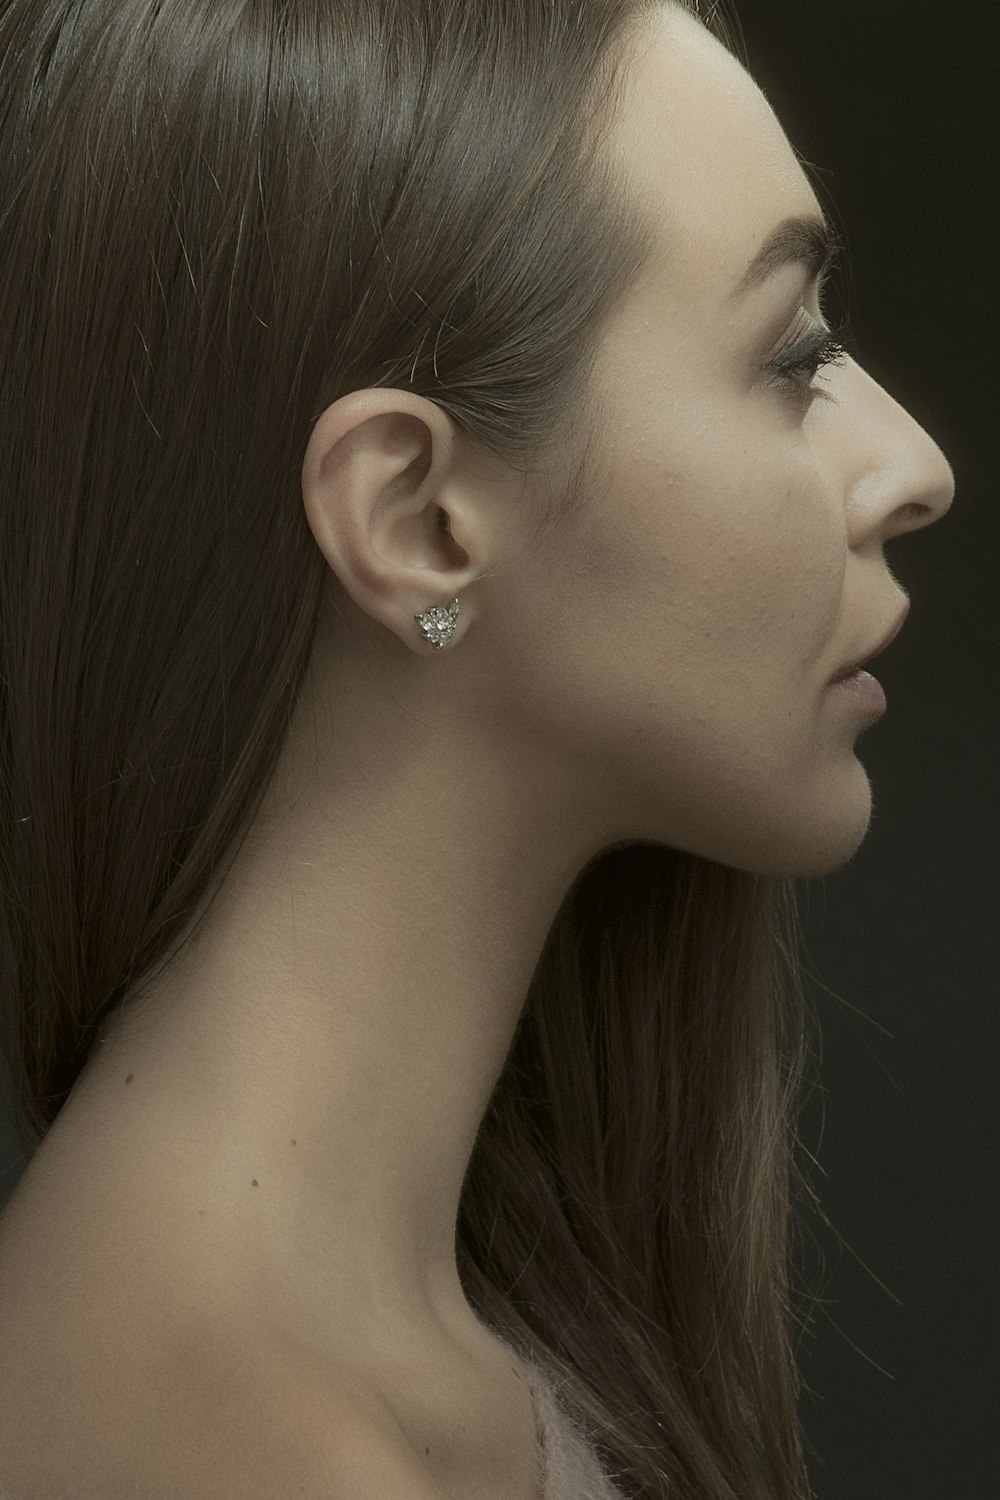 woman with silver stud earring